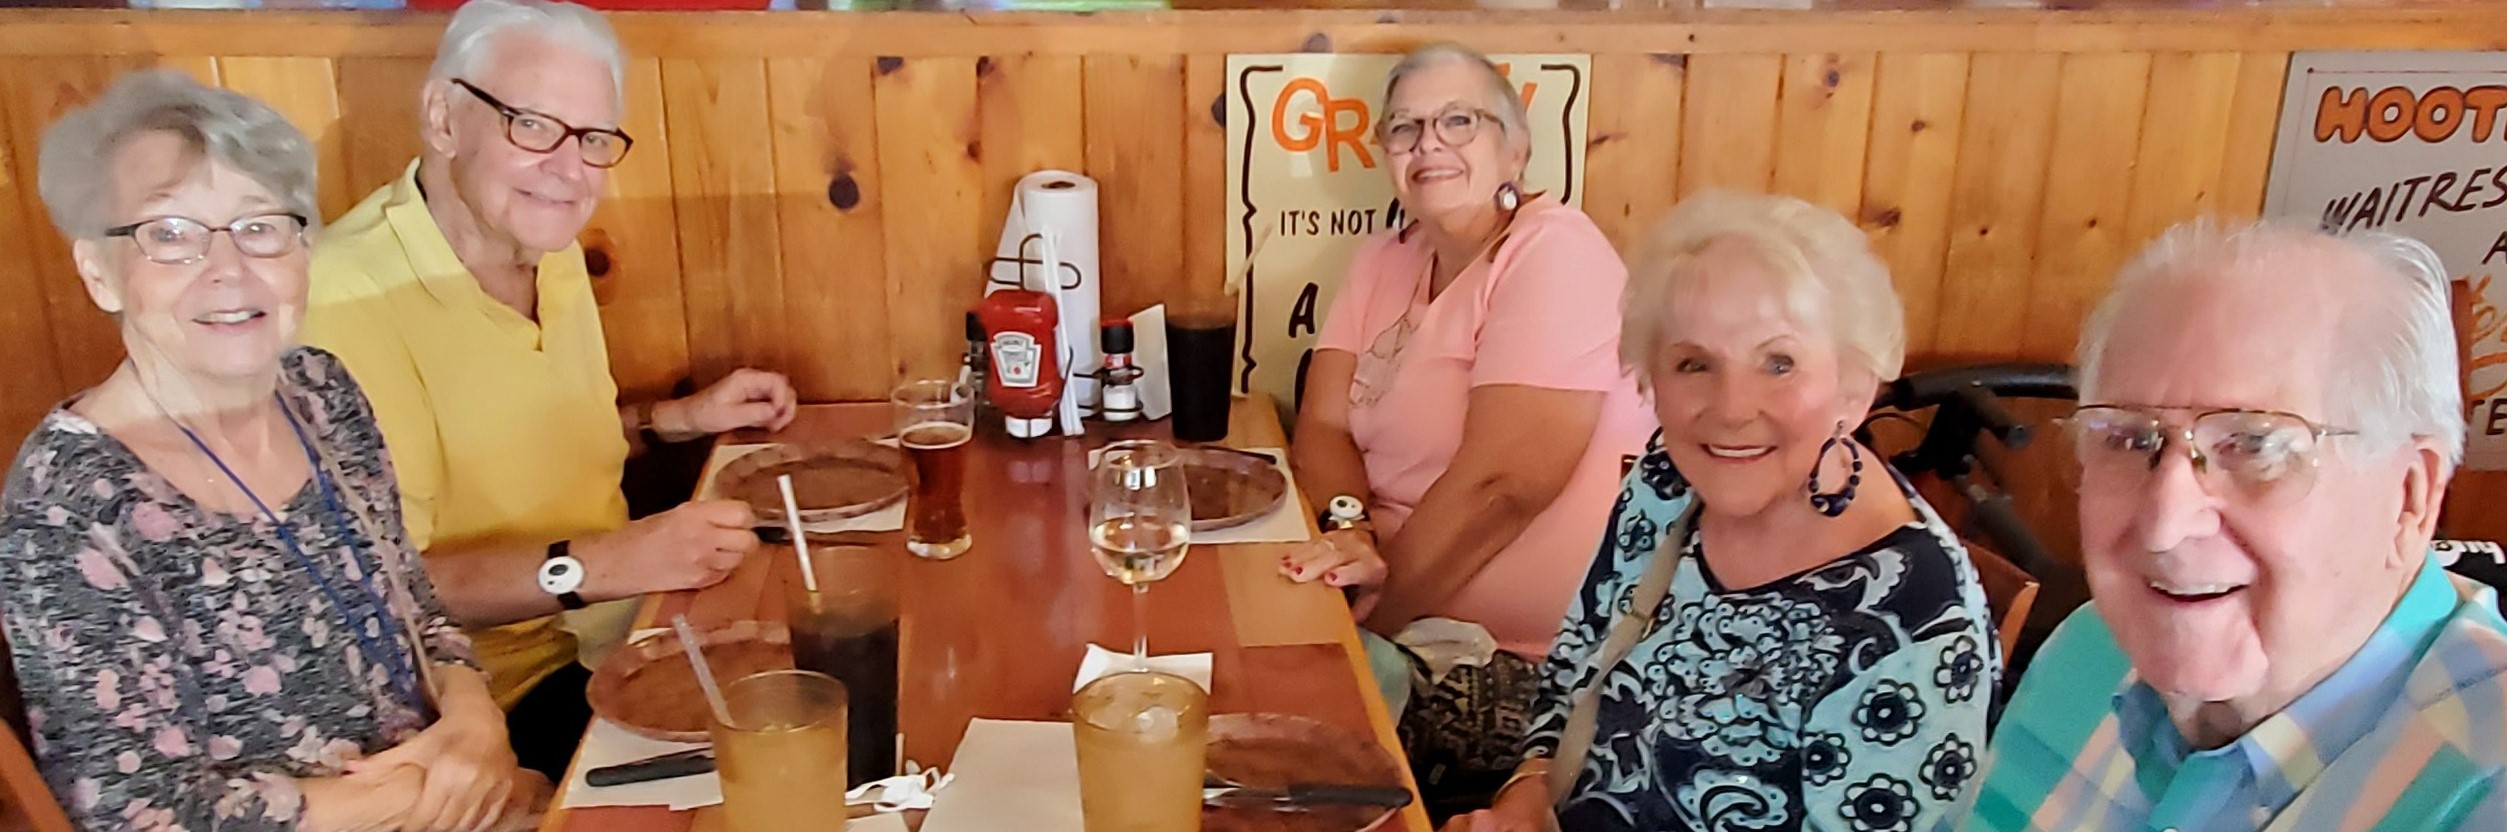 Assisted Living Excursion to Hooters - Aravilla Sarasota resident outings